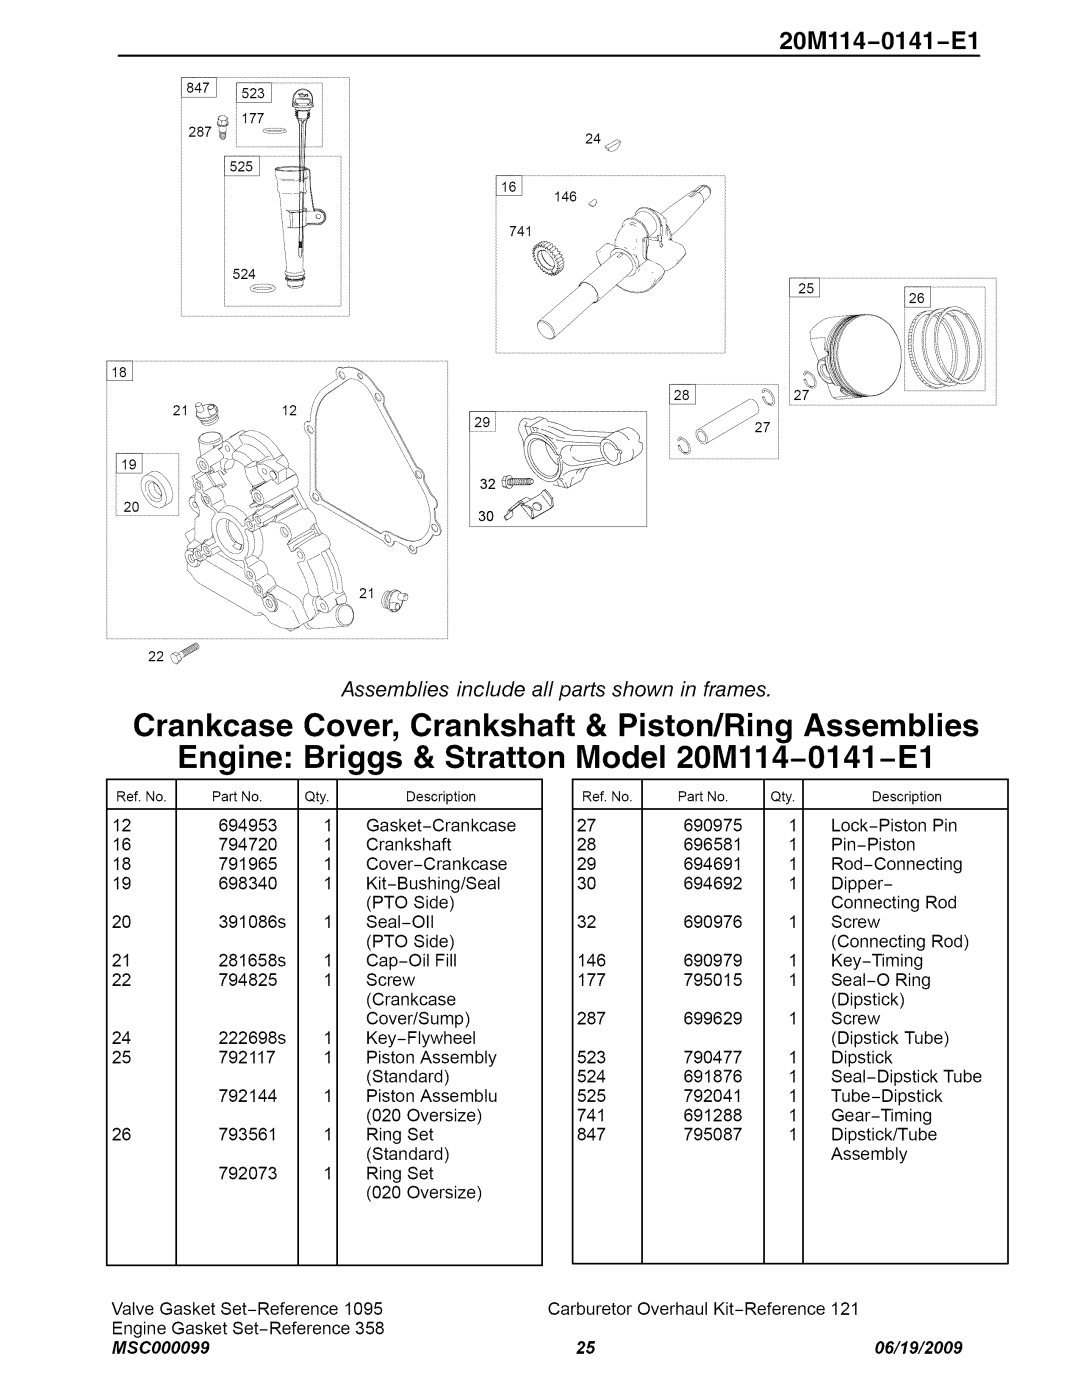 Craftsman C950-52943-0 owner manual 20Ml14-0141 -El, Assemblies include all parts shown in frames, MSC000099, 06/19/2009 